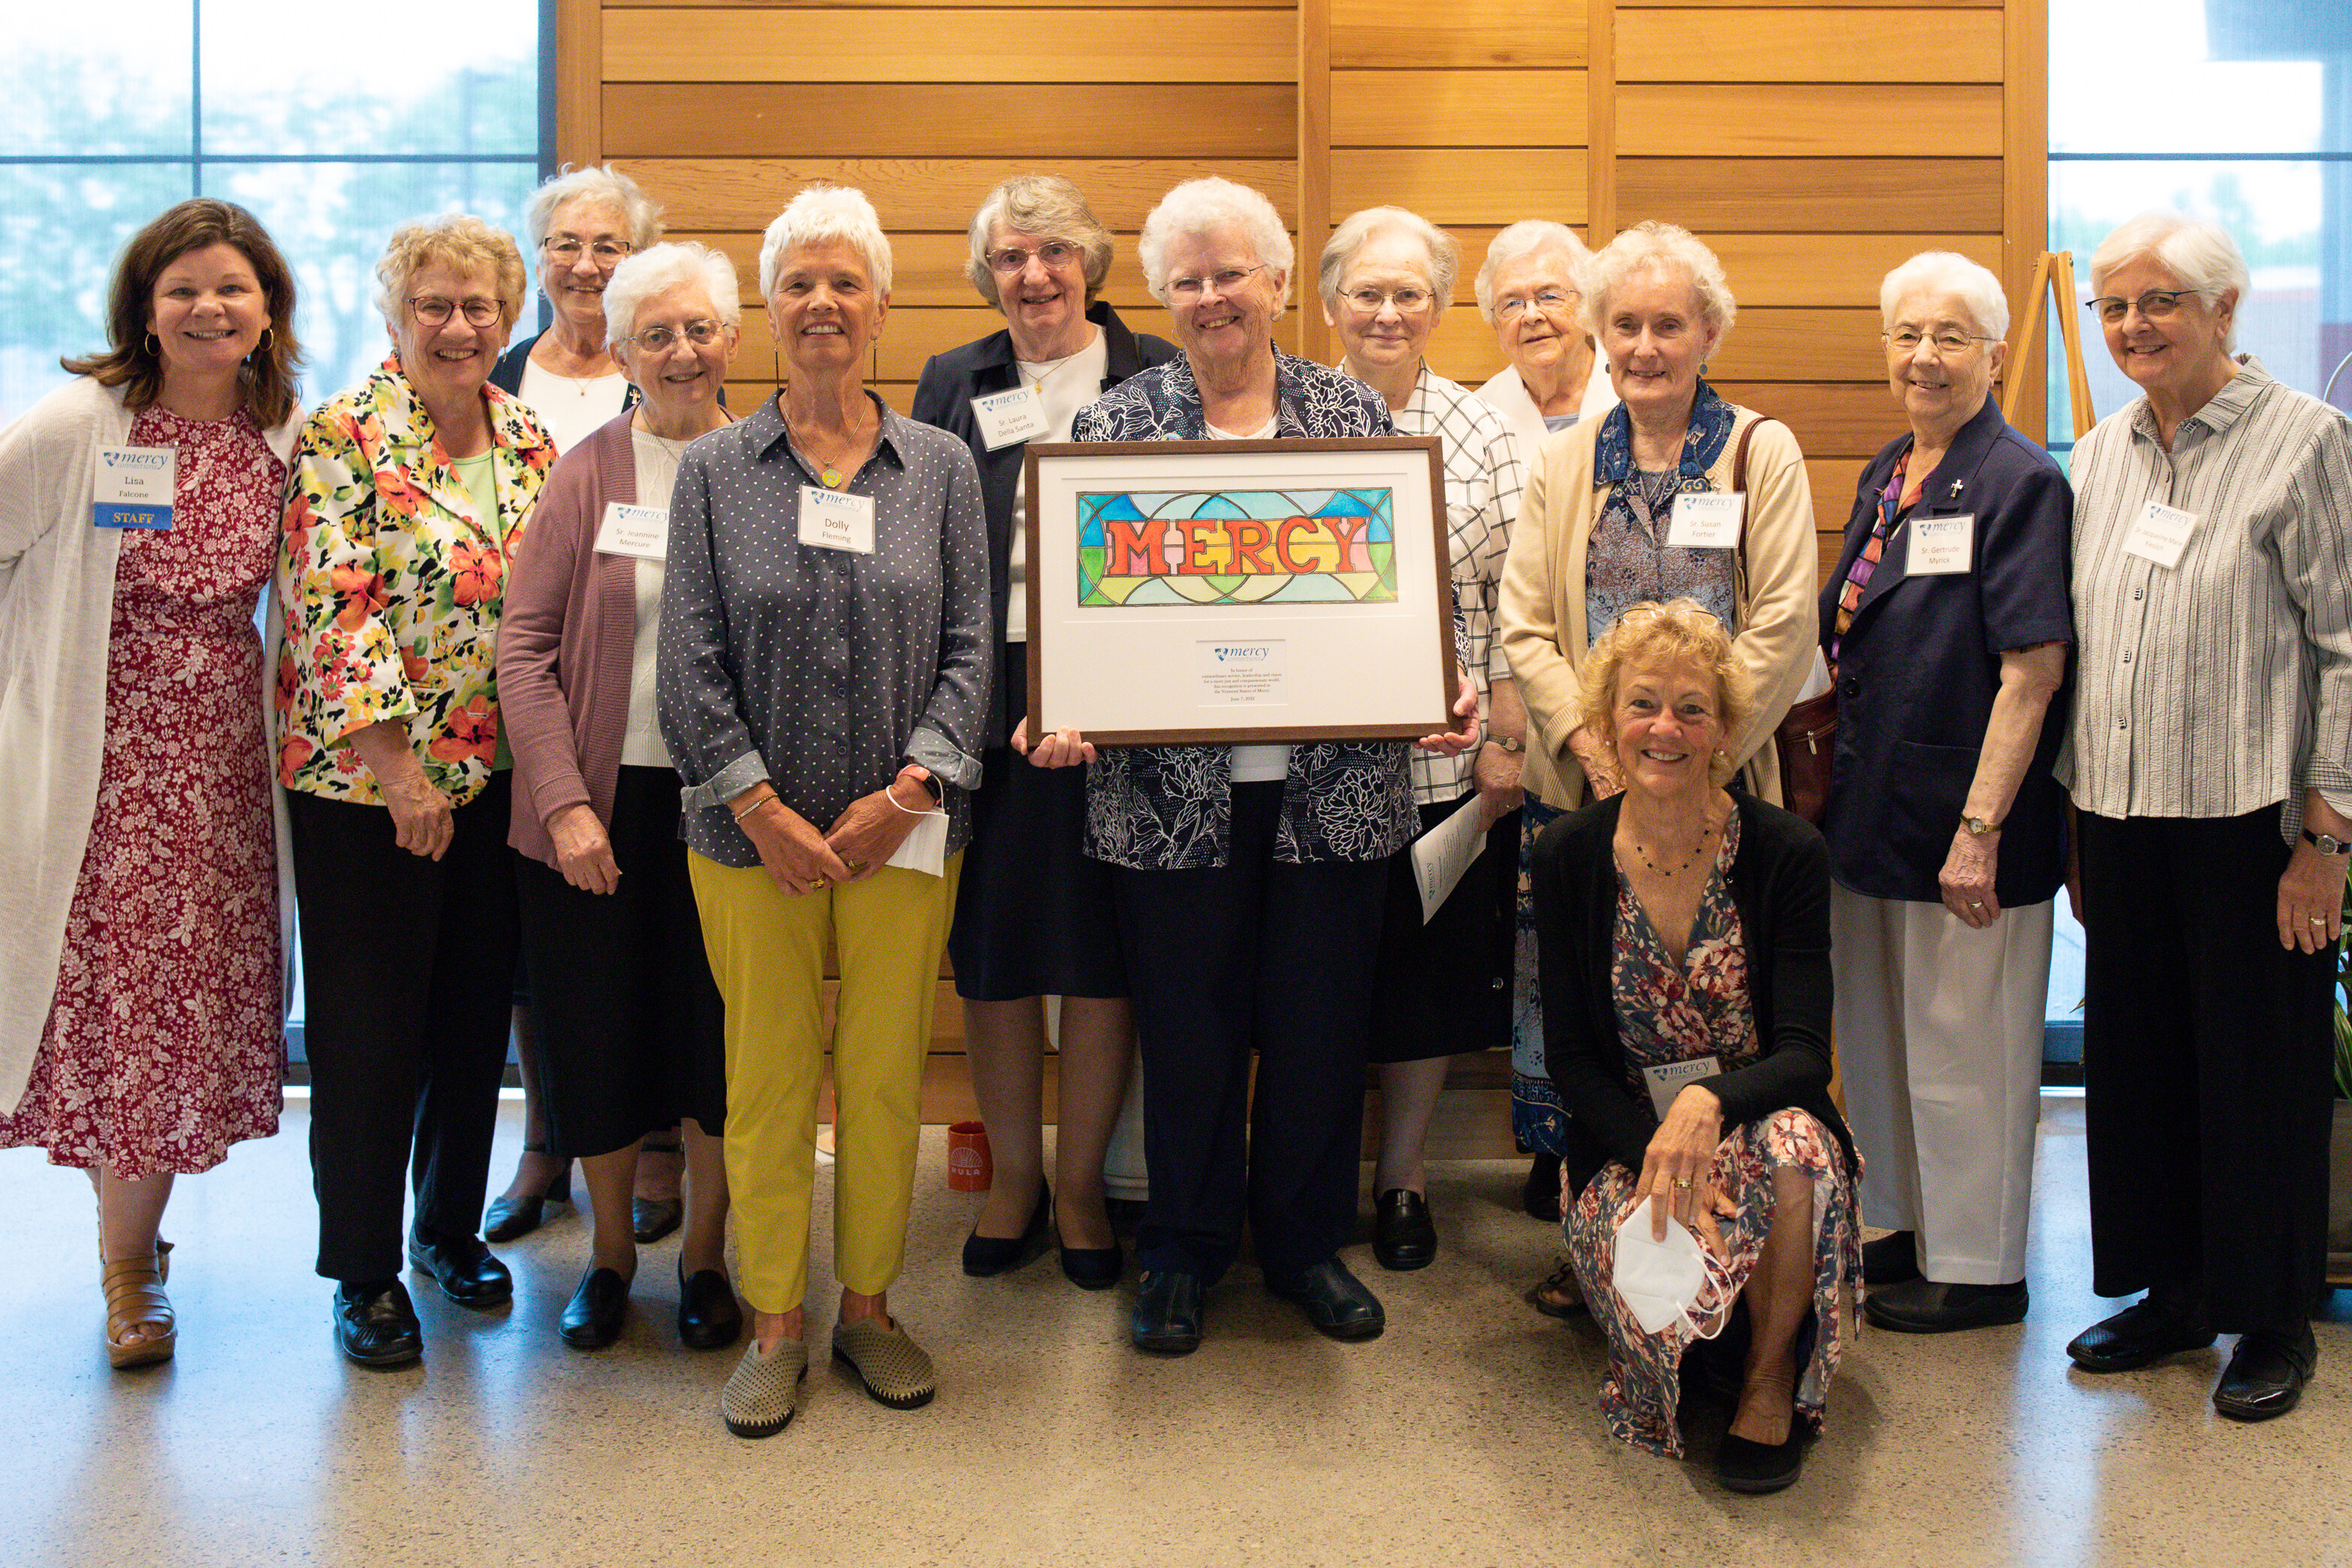 A large group of older women, the Vermont Sisters of Mercy, with a framed painting of the word 